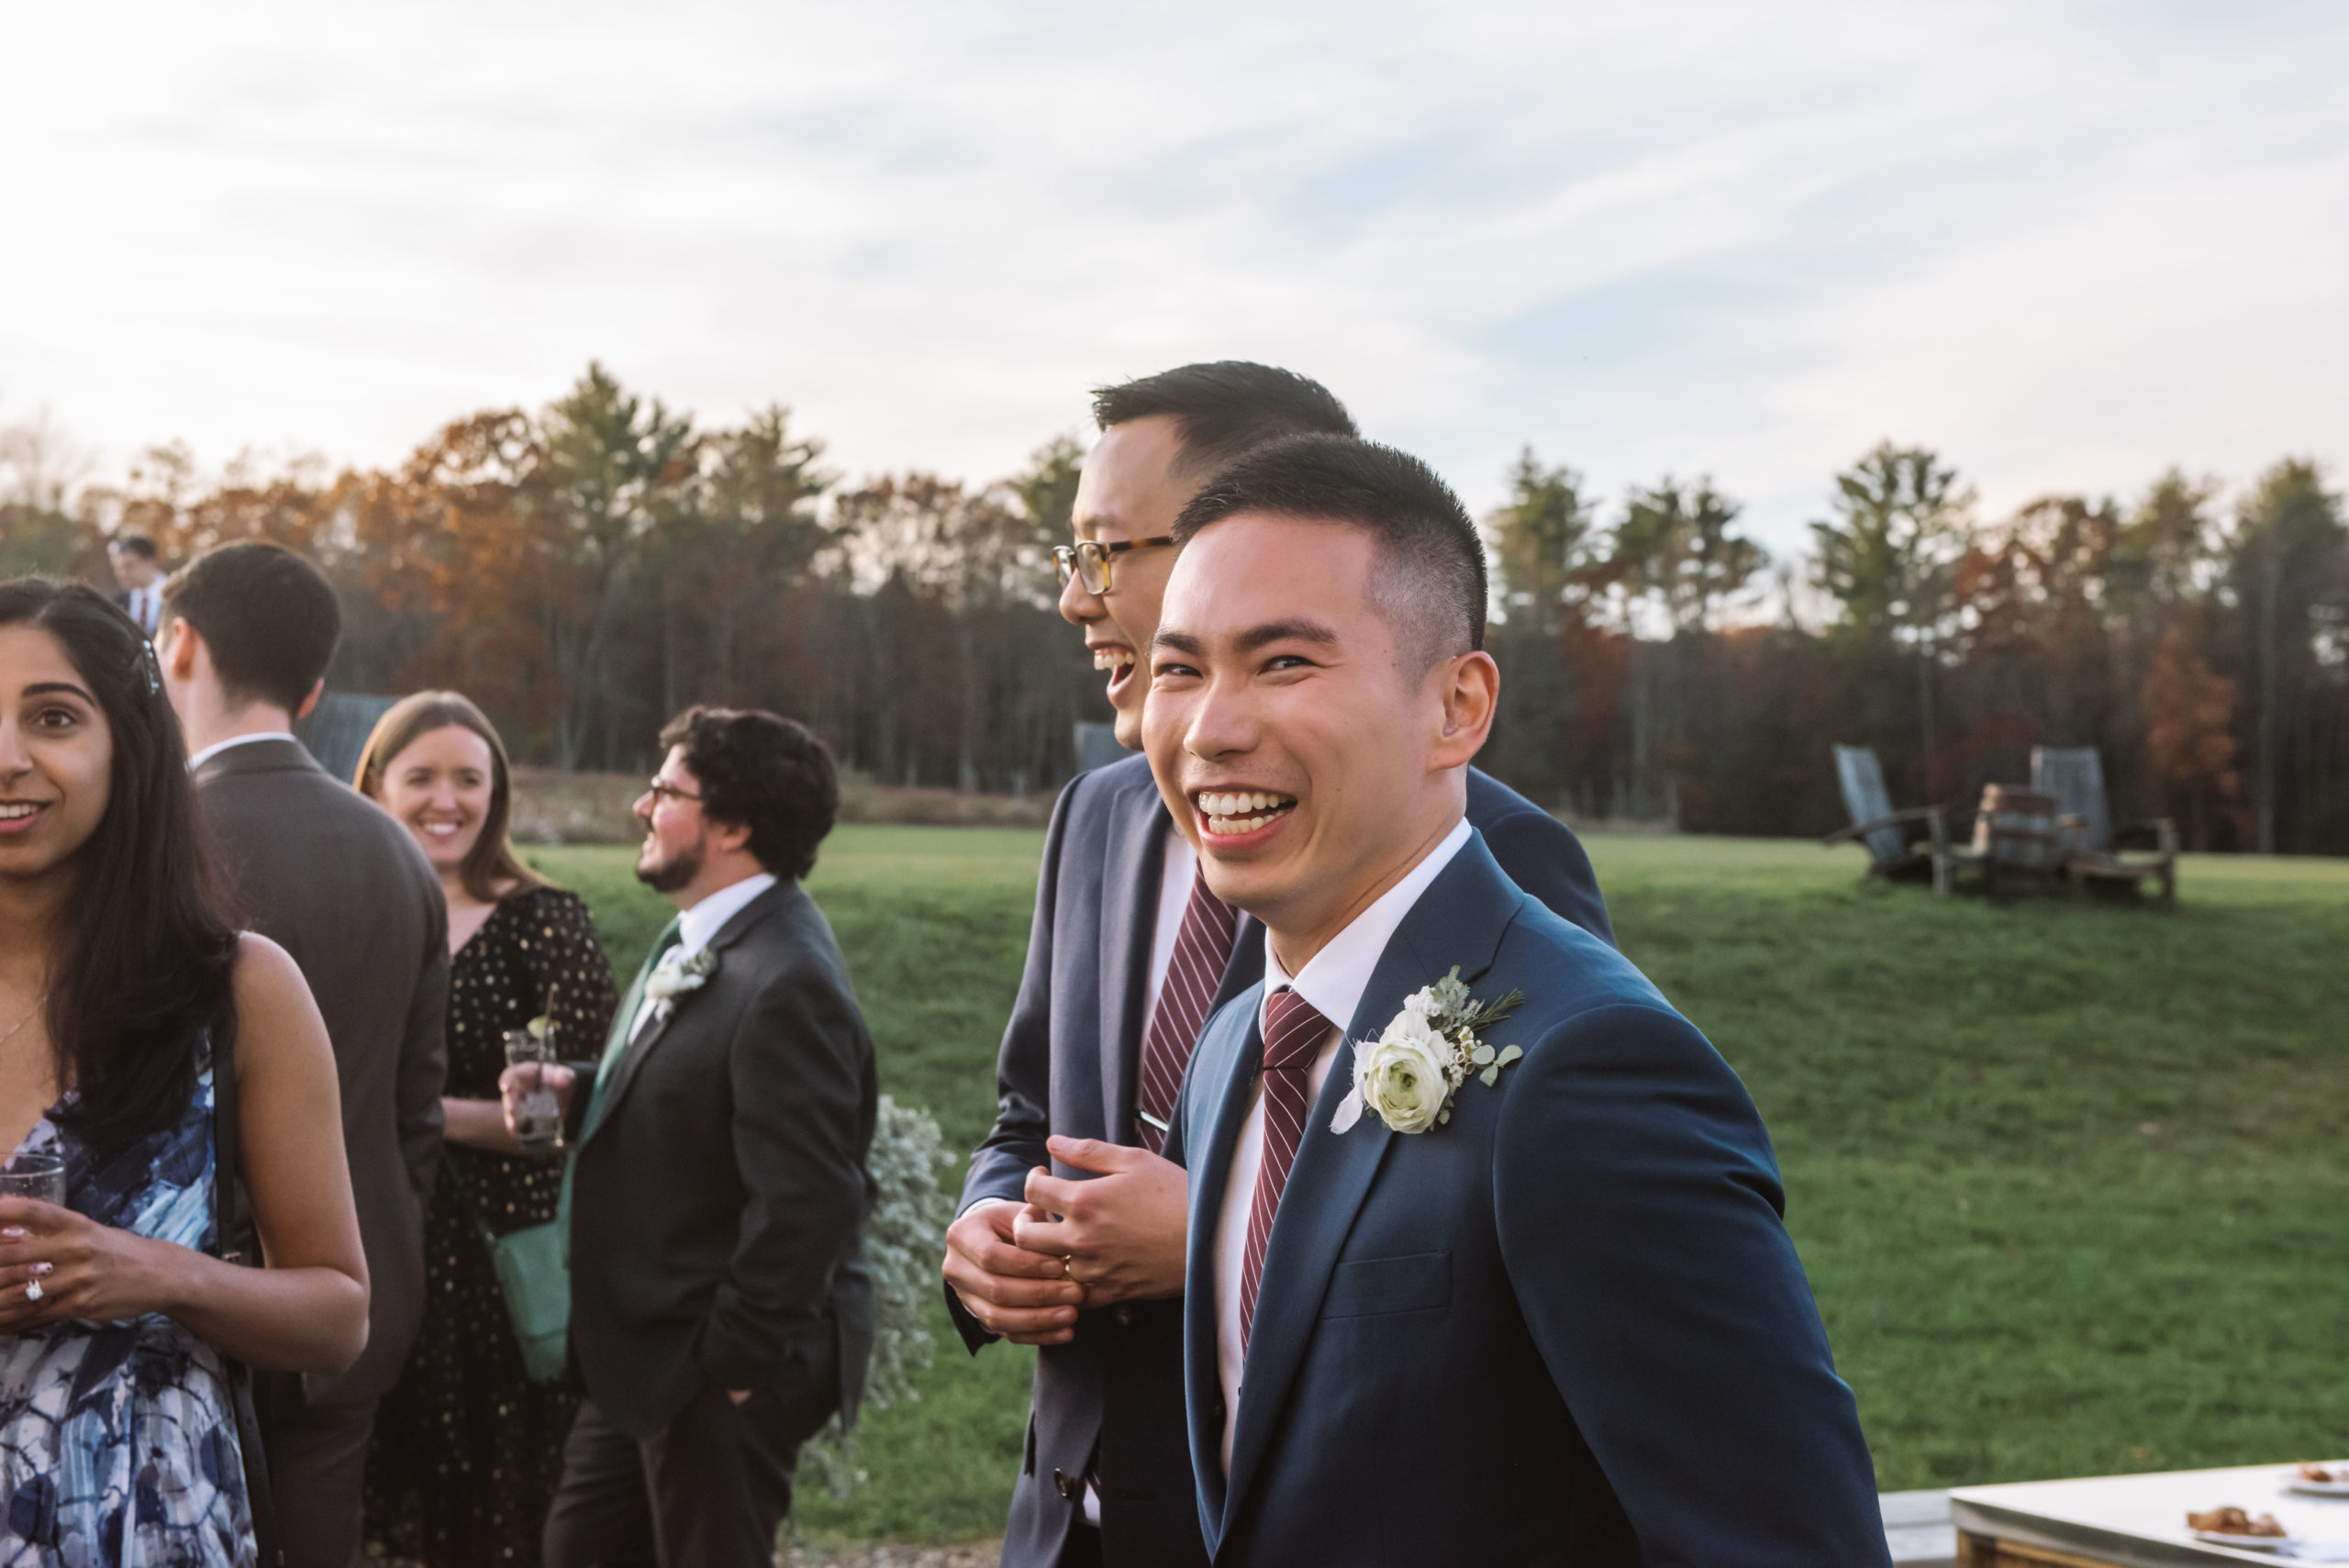 Groom's head is turned toward the camera and he is smiling/laughing. His husband is also smiling/laughing behind him, looking straight ahead (he is faced towards his guests). He has his right hand holding his wedding band on his left hand.